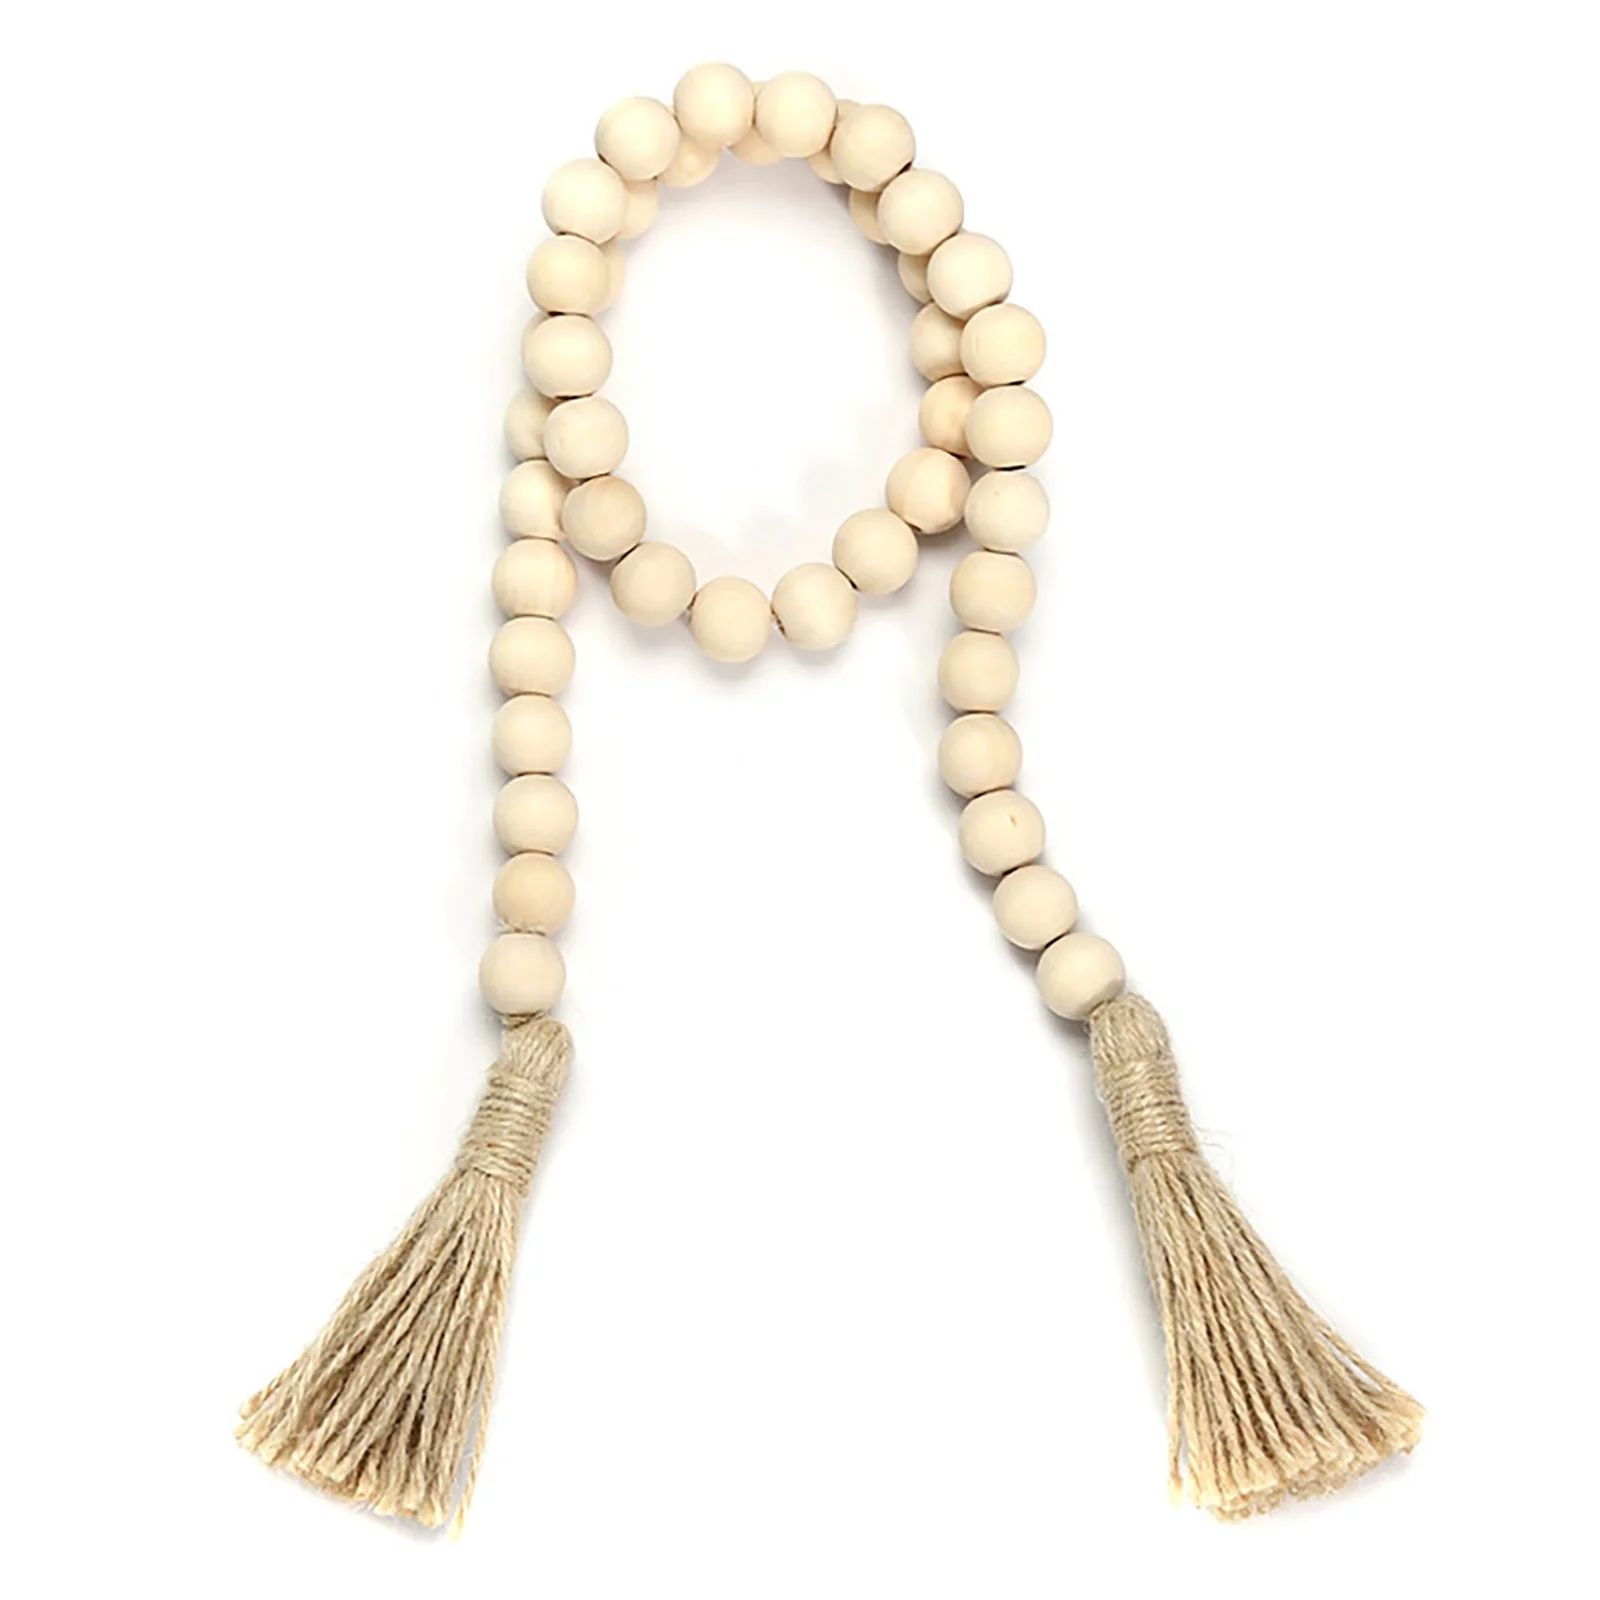 Wood Beads Garland with Tassels 5 Styles Beads Rustic Natural Wooden Bead | Walmart (US)